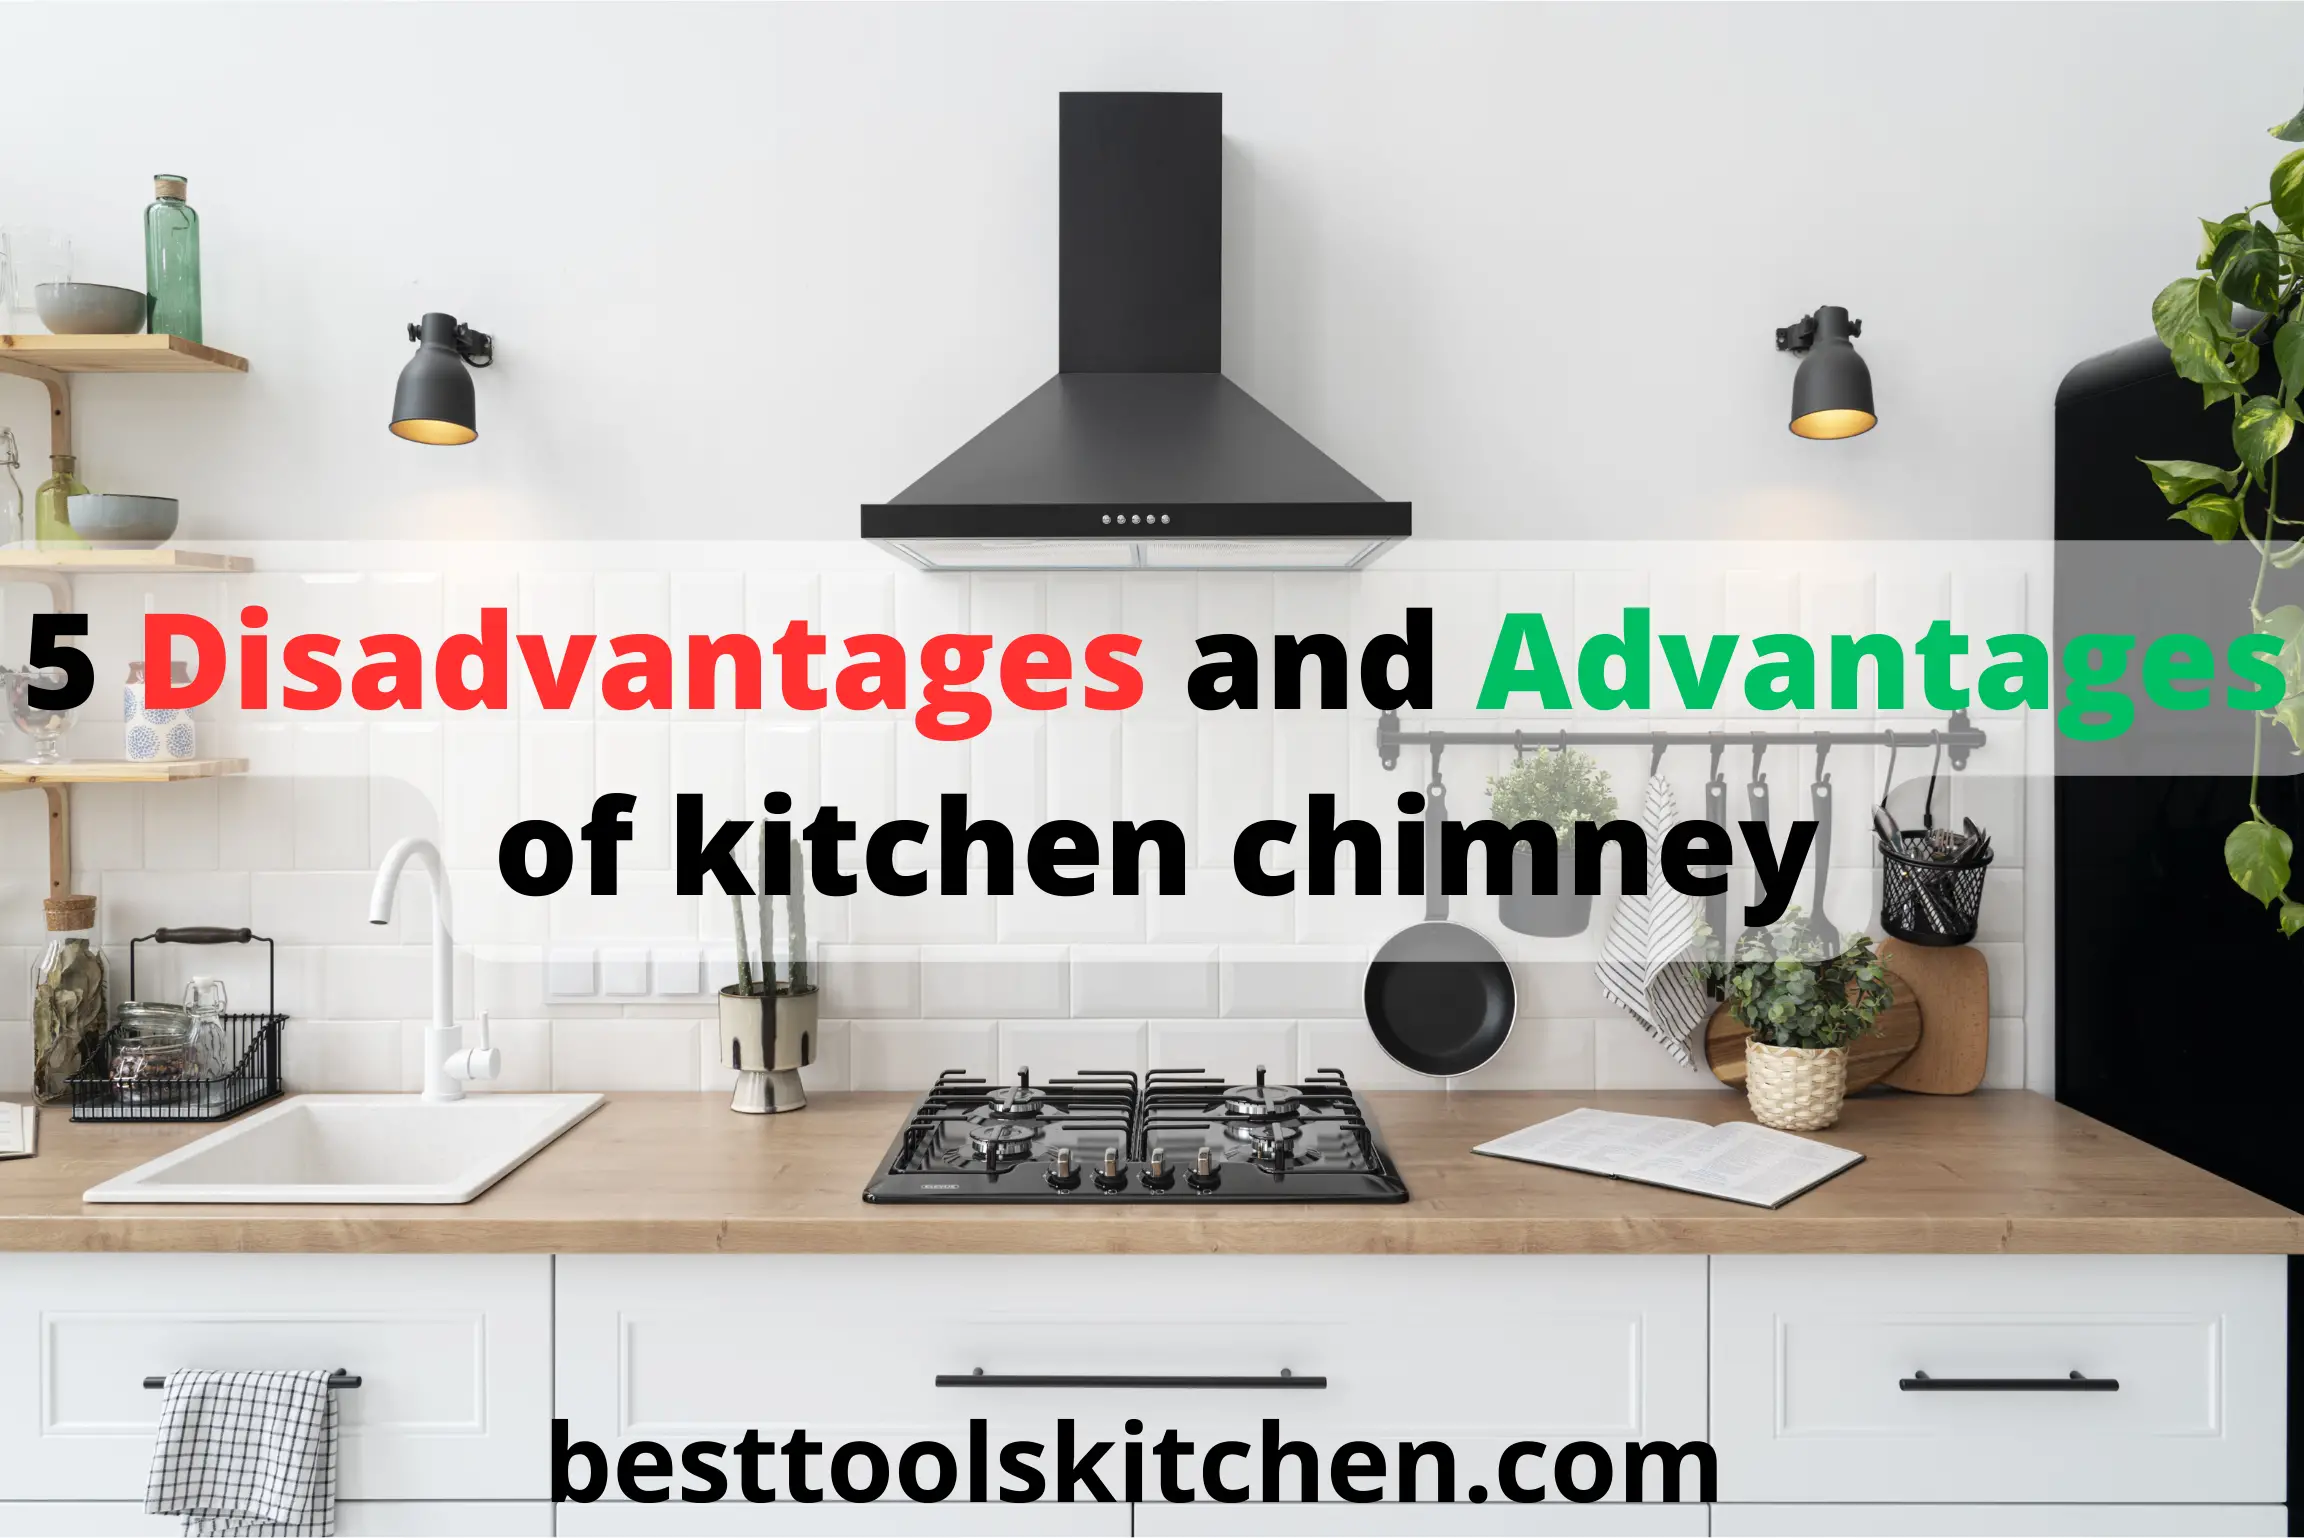 Advantages and Disadvantages of kitchen chimney